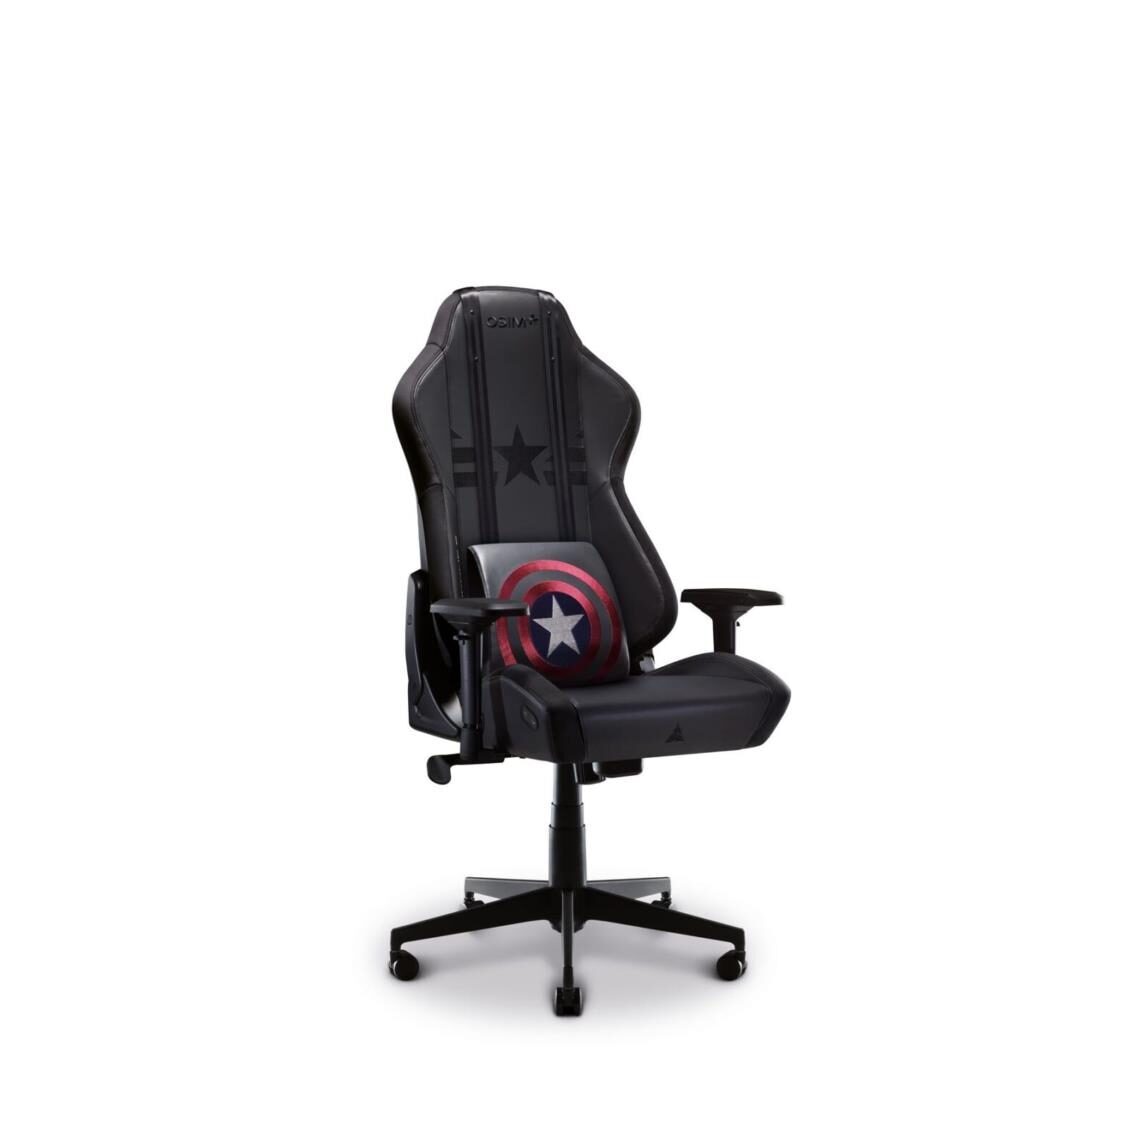 Uthone S Gaming Chair - Captain America Pre-Assembled